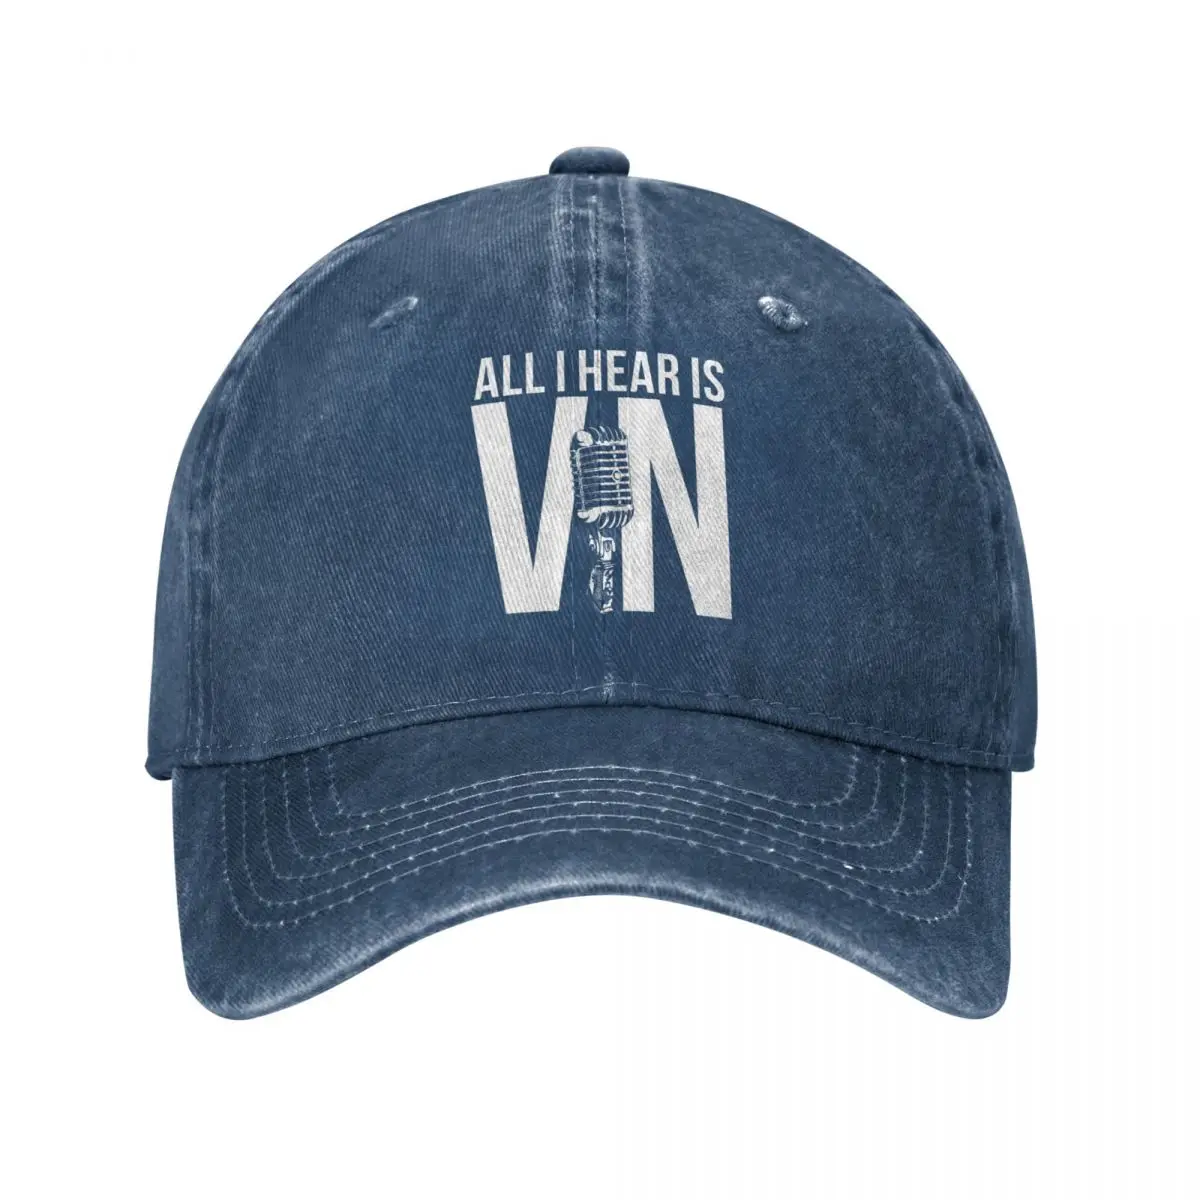 

2022 New All I Hear Is Vin Scully Wash Baseball Cap Adjustable Hat Dad Cap Spring Summer Vintage Casquette Gorras